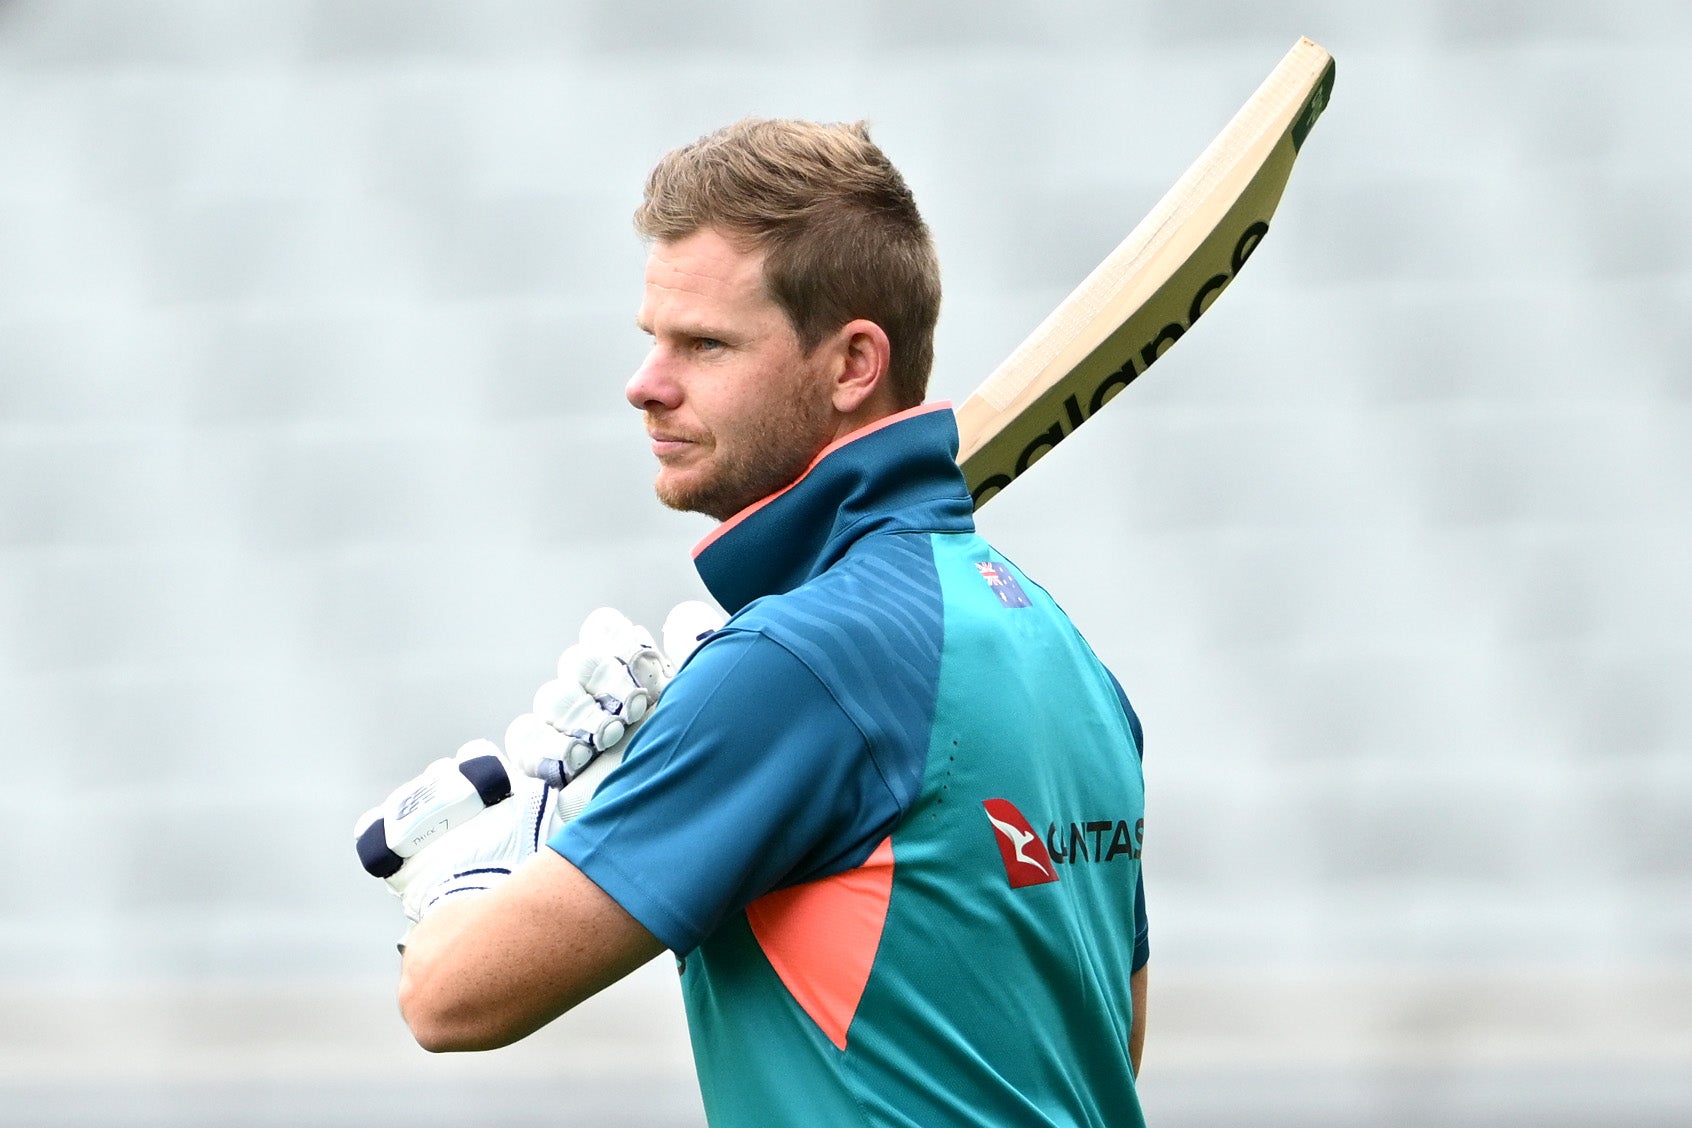 Steve Smith has been left out of Australia’s T20 World Cup squad